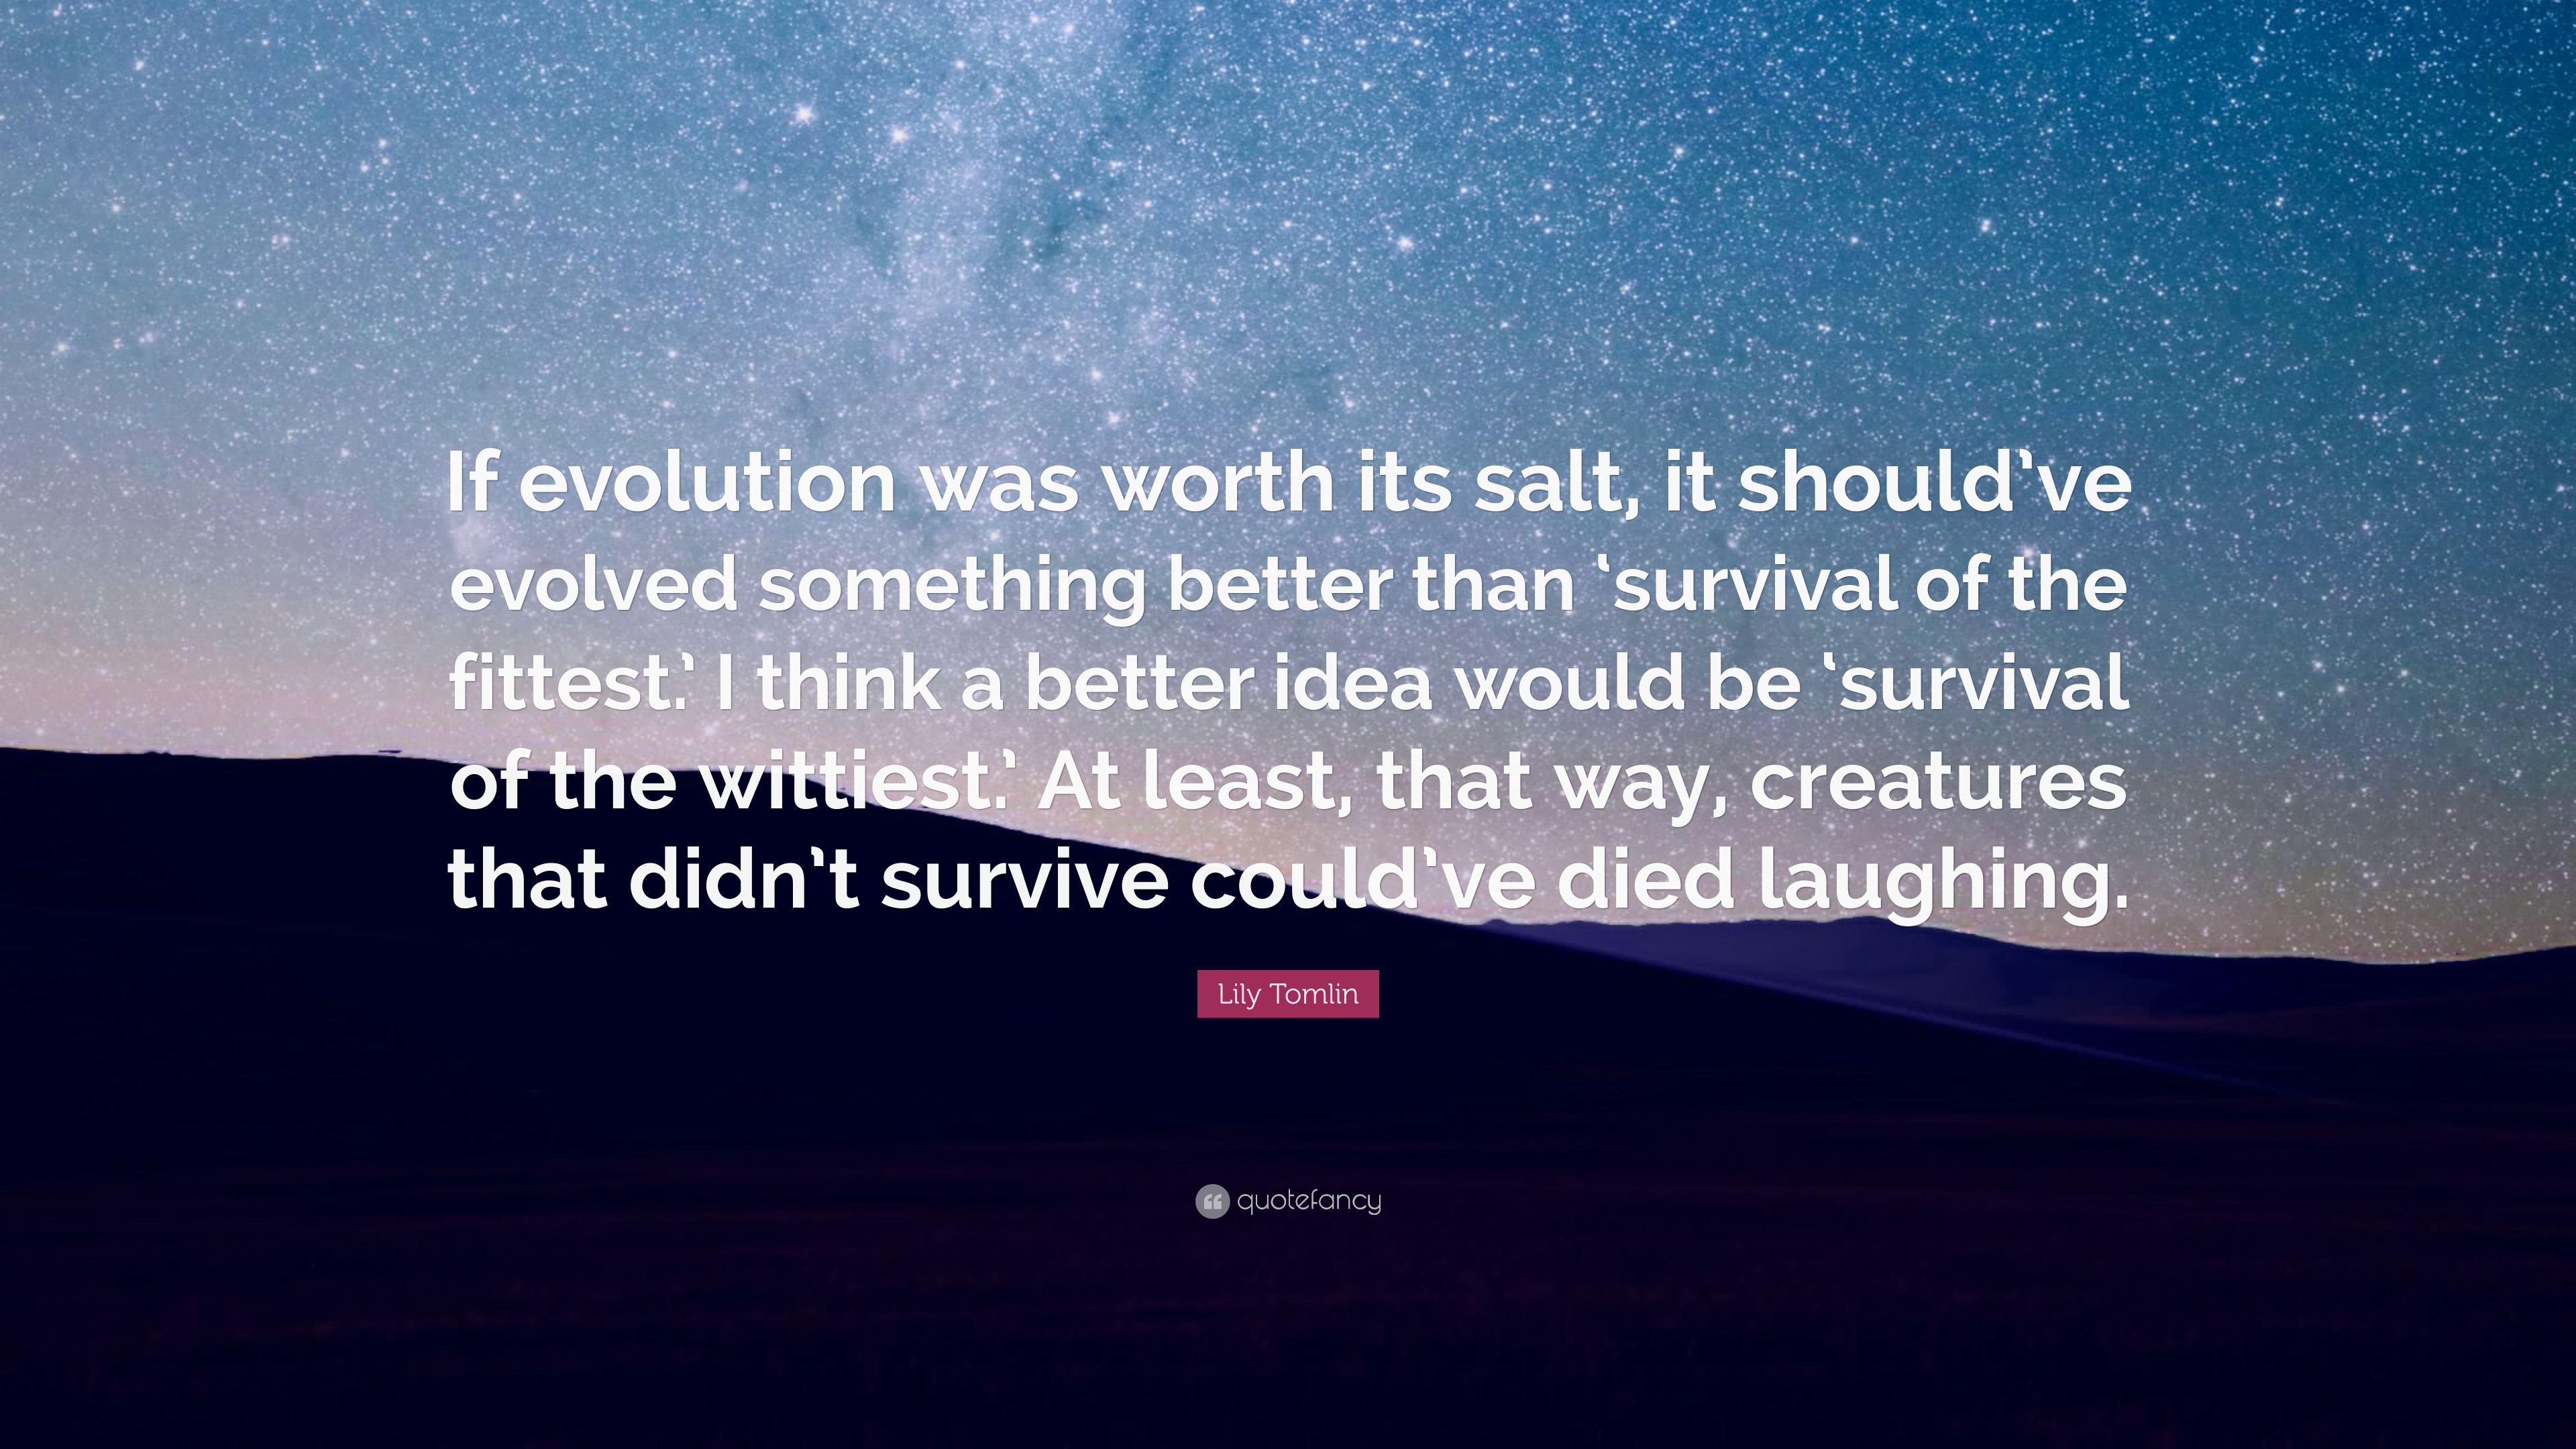 3840x2160 Lily Tomlin Quote: “If evolution was worth its salt, it should've